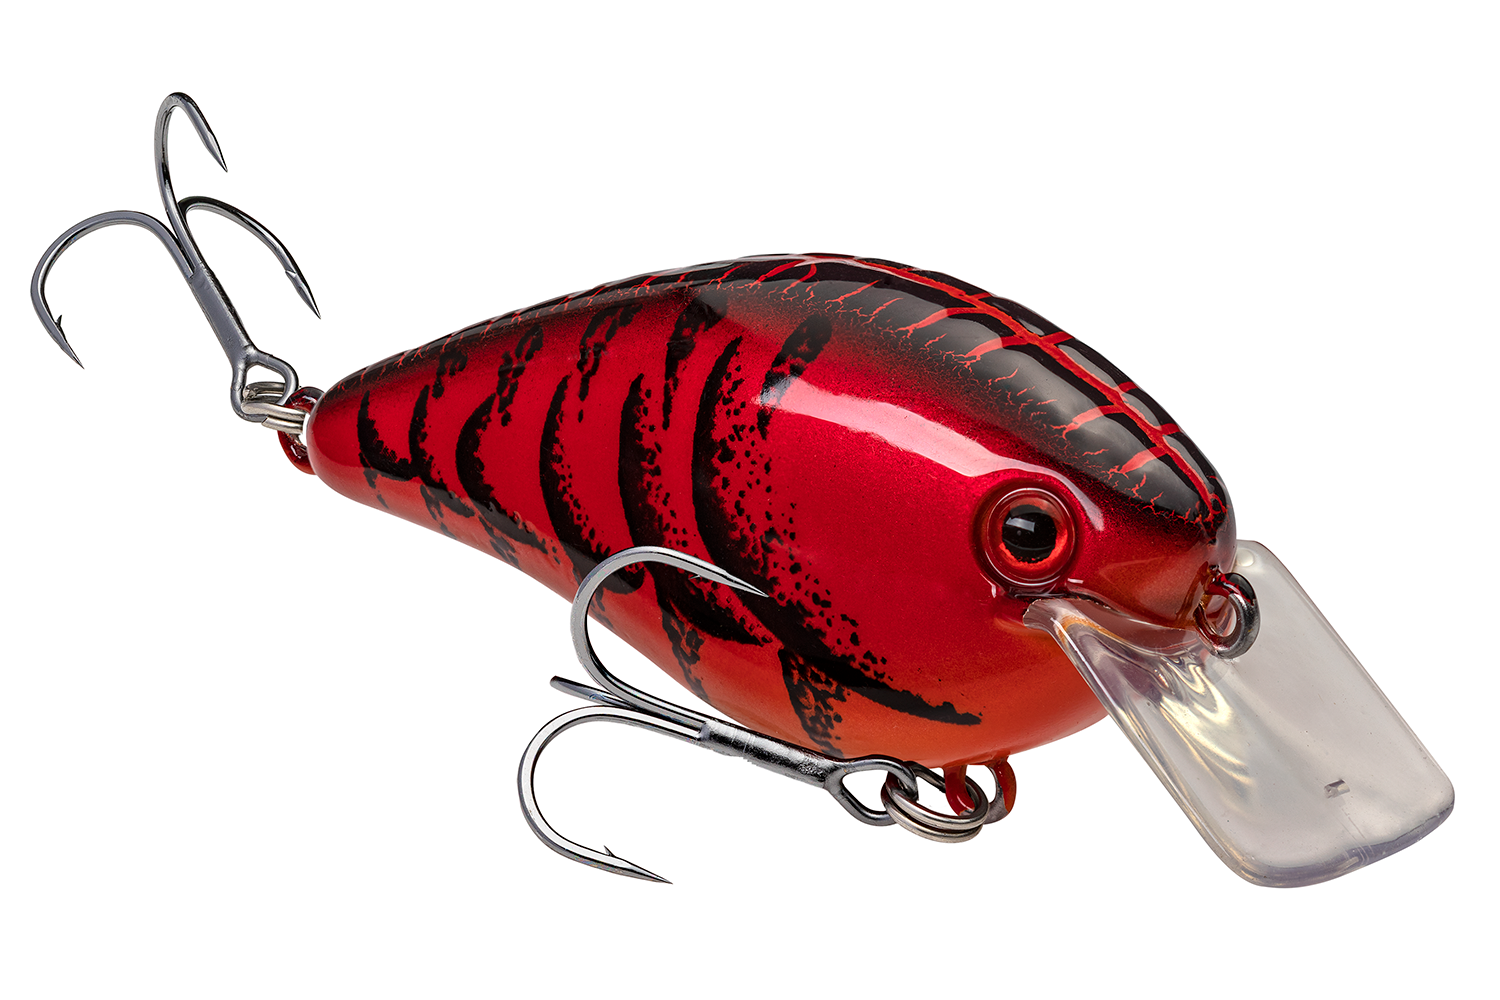 <p><b>Strike King KVD 1.5 Hard Knock</b></p>
<p>While the original silent KVD Squarebills have set the world on fire, the desire for a rattling version has become strong.  So, building on the popularity of the Tungsten 2 Tap Red Eyed Shad and the Hard Knock Sexy Dog, Strike King developed the KVD 1.5 Hard Knock Squarebill. The KVD 1.5 Hard Knock Squarebill will be available in the fall of 2020.</p>
<p><a href=